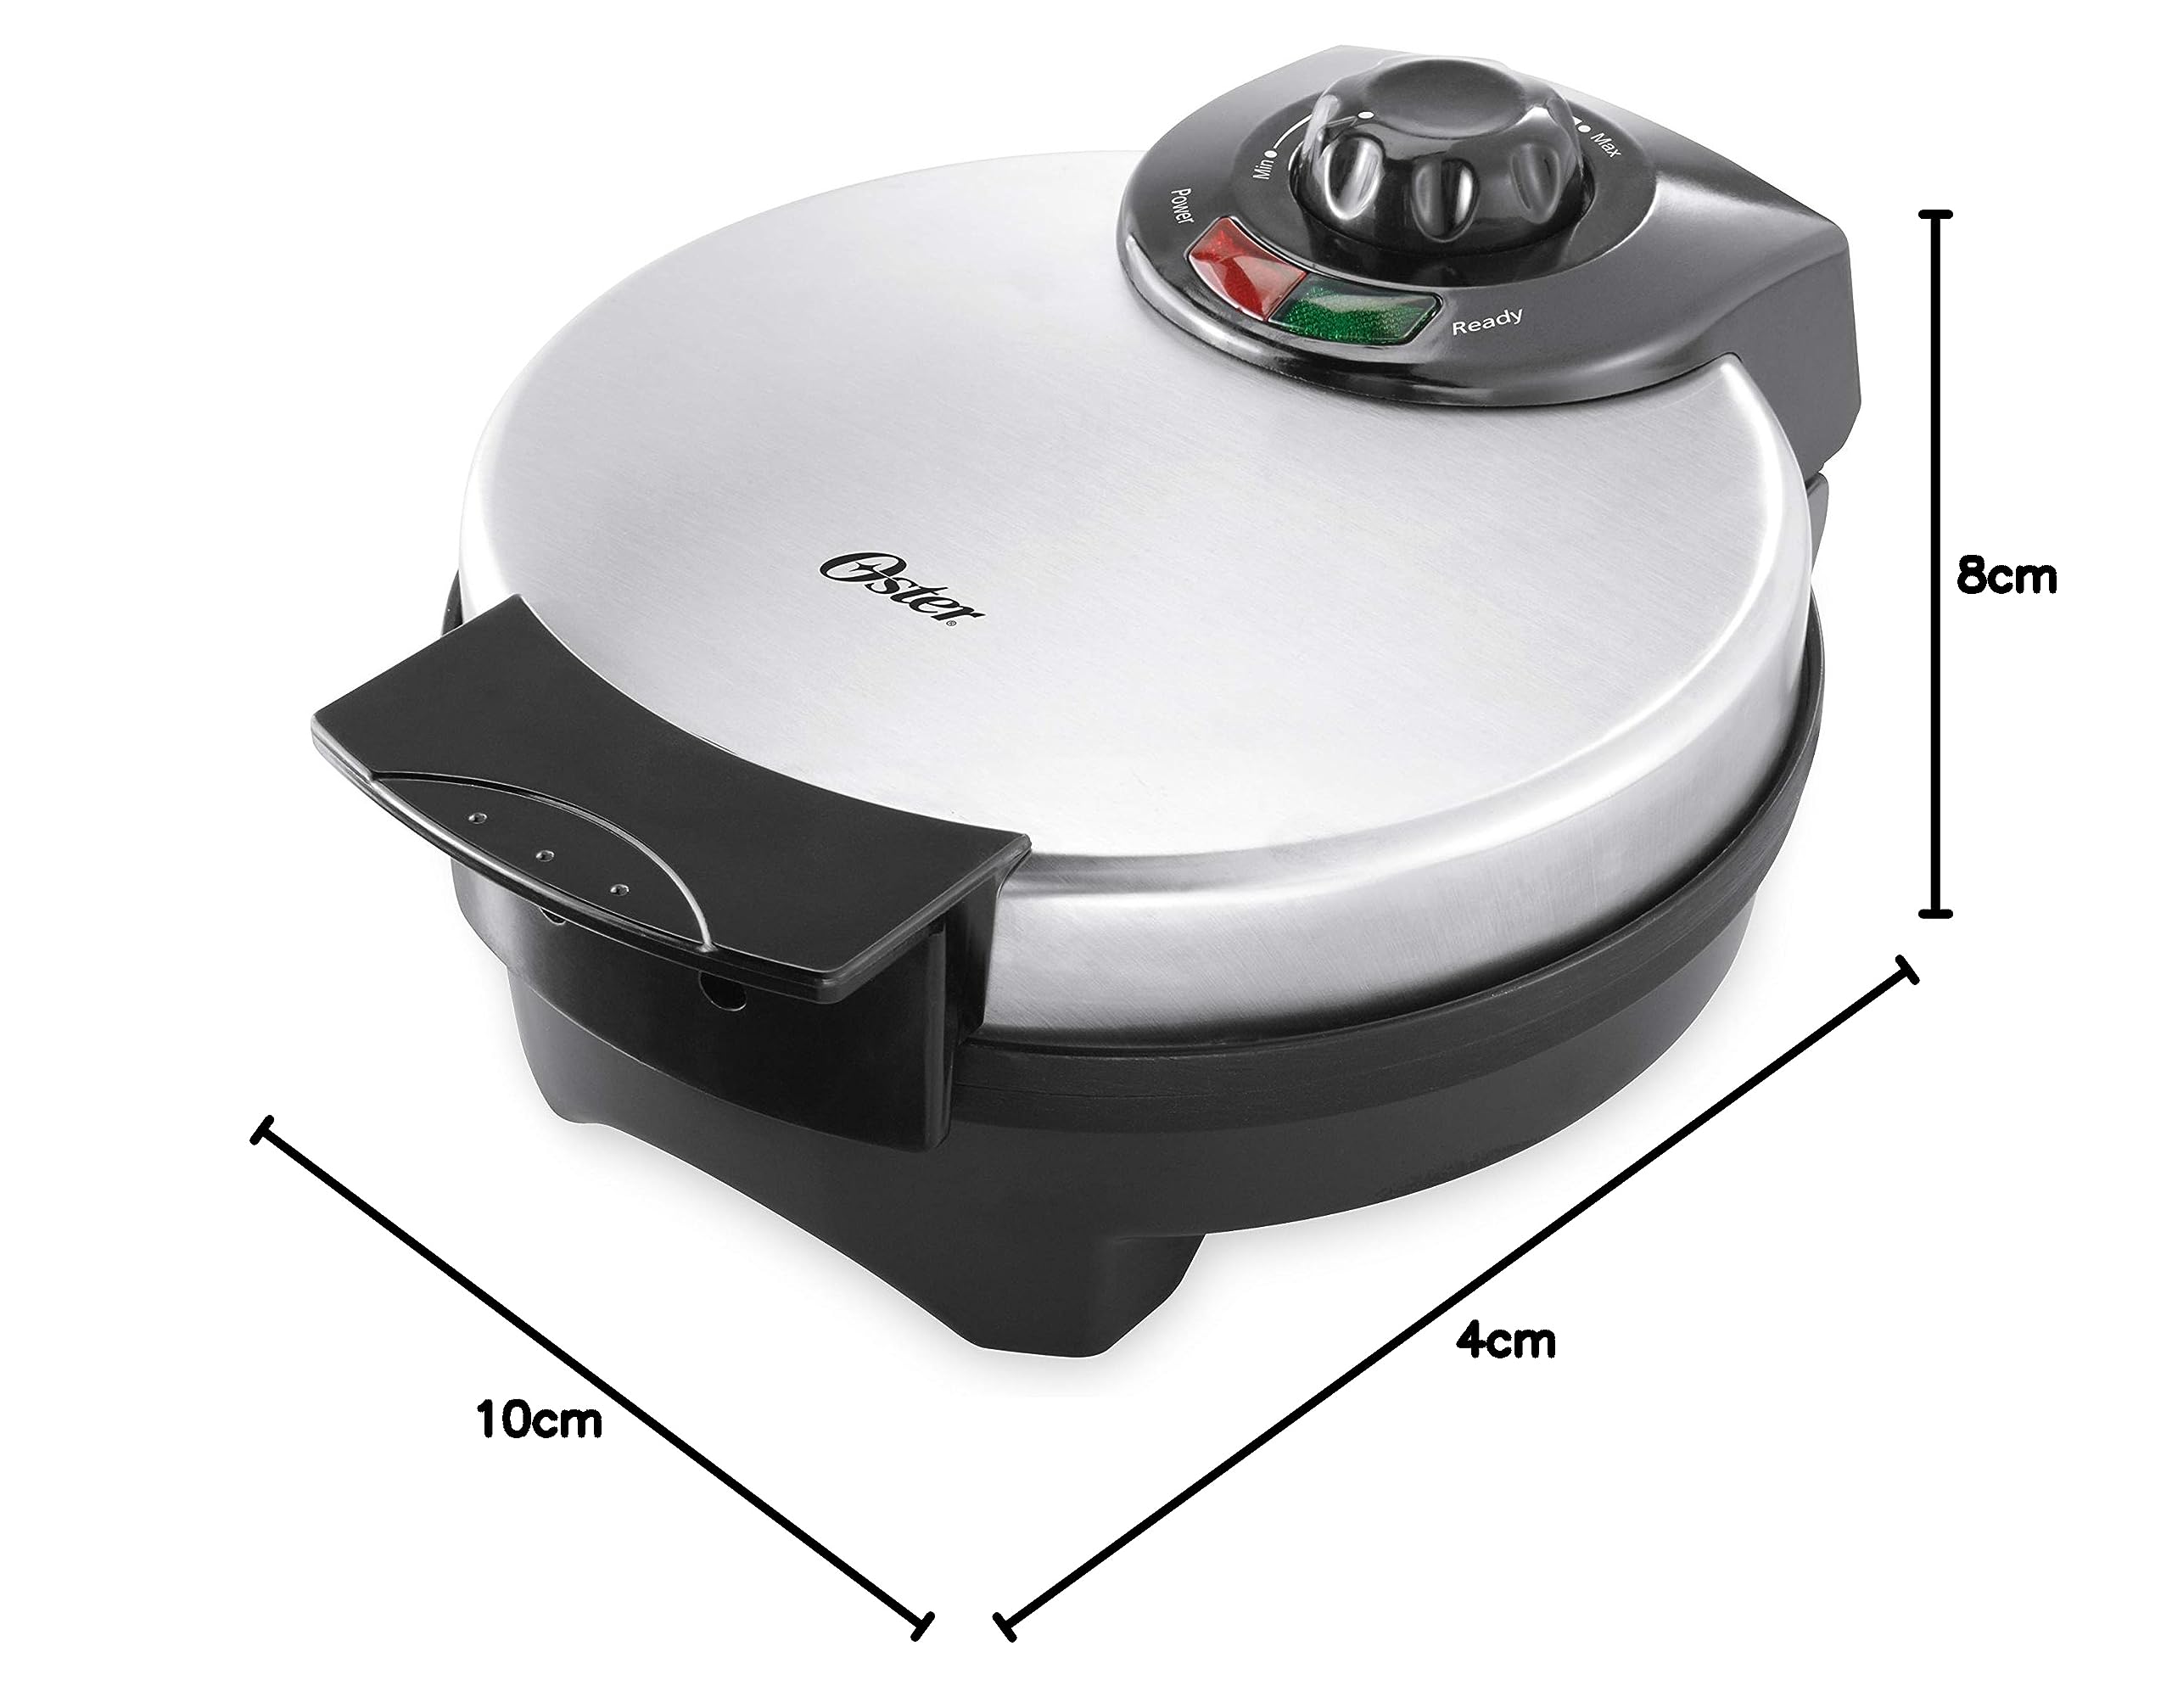 Oster Belgian Waffle Maker with Adjustable Temperature Control, Non-Stick Plates and Cool Touch Handle, Makes 8